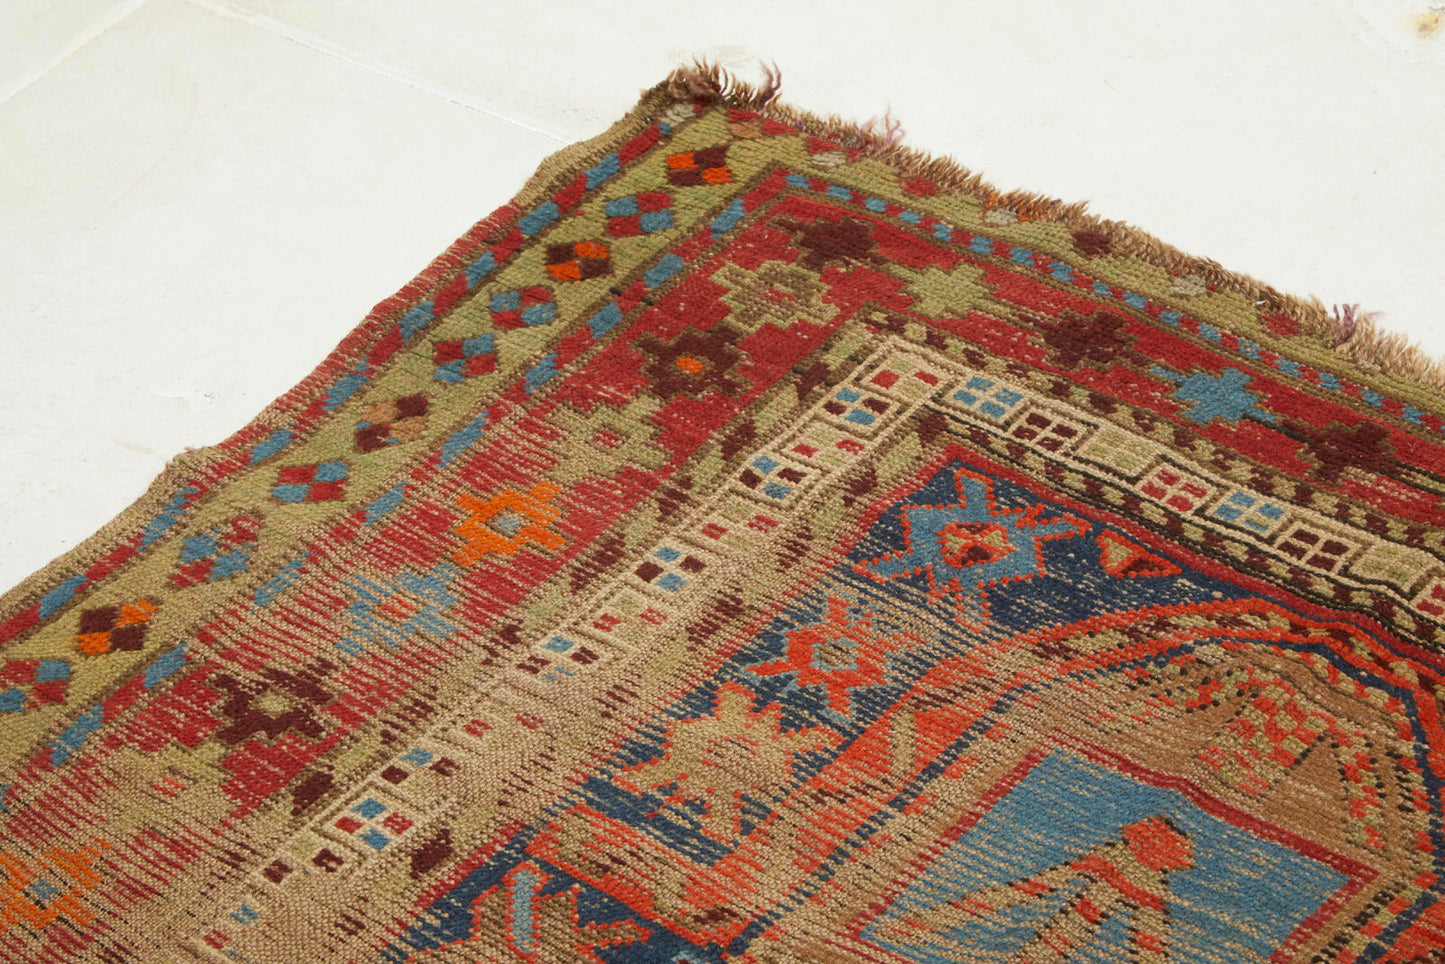 Available from King Kennedy Rugs Los Angeles 